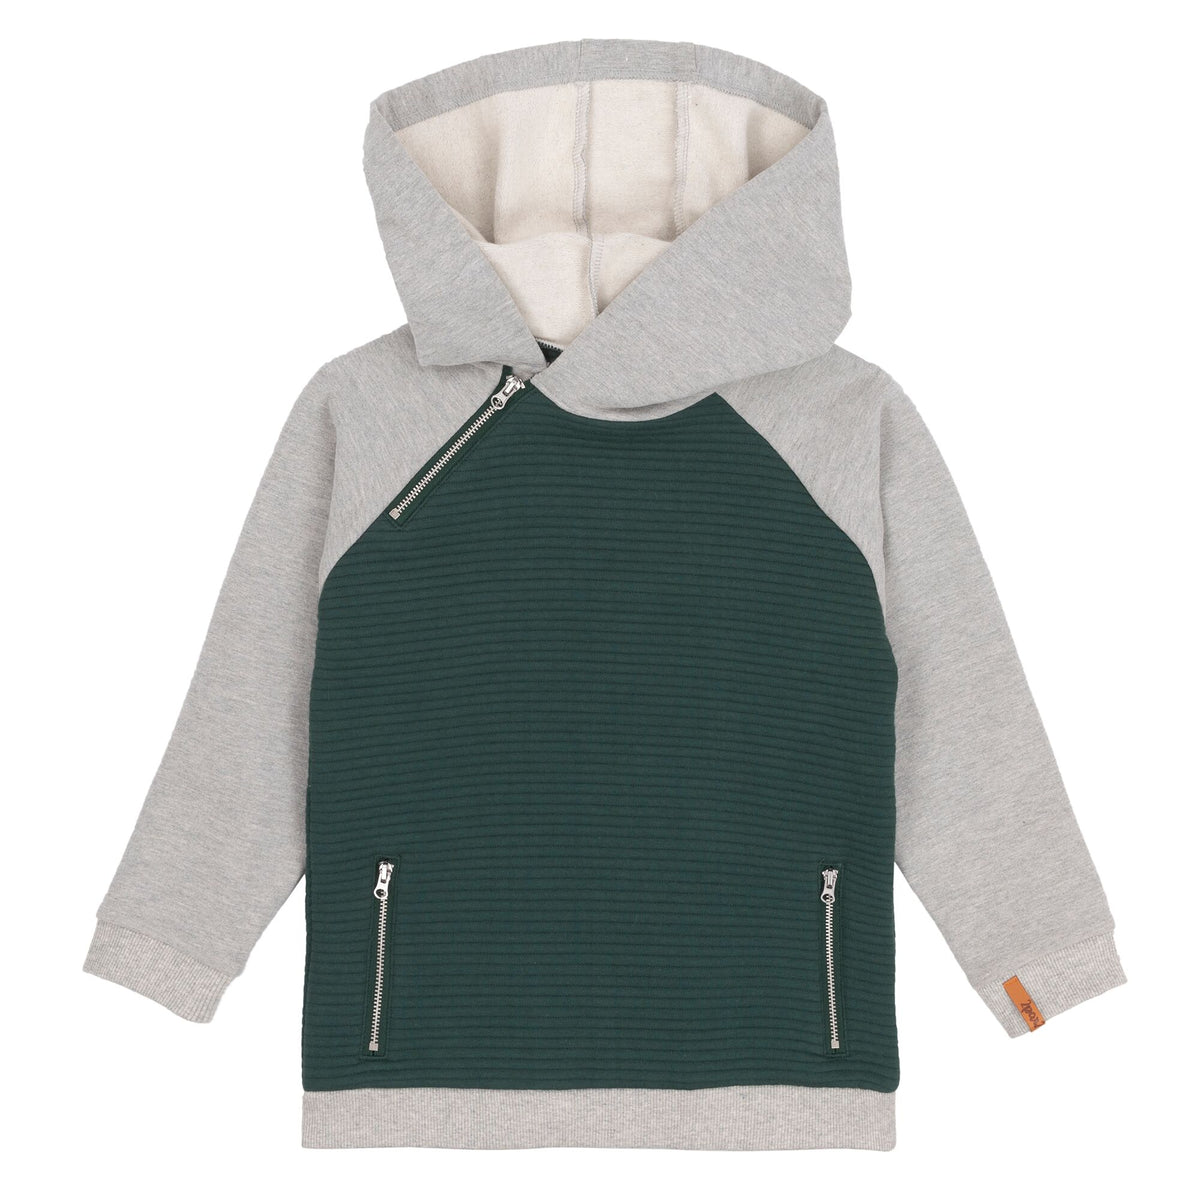 Boys Hoodie with Patches and Side Zipper